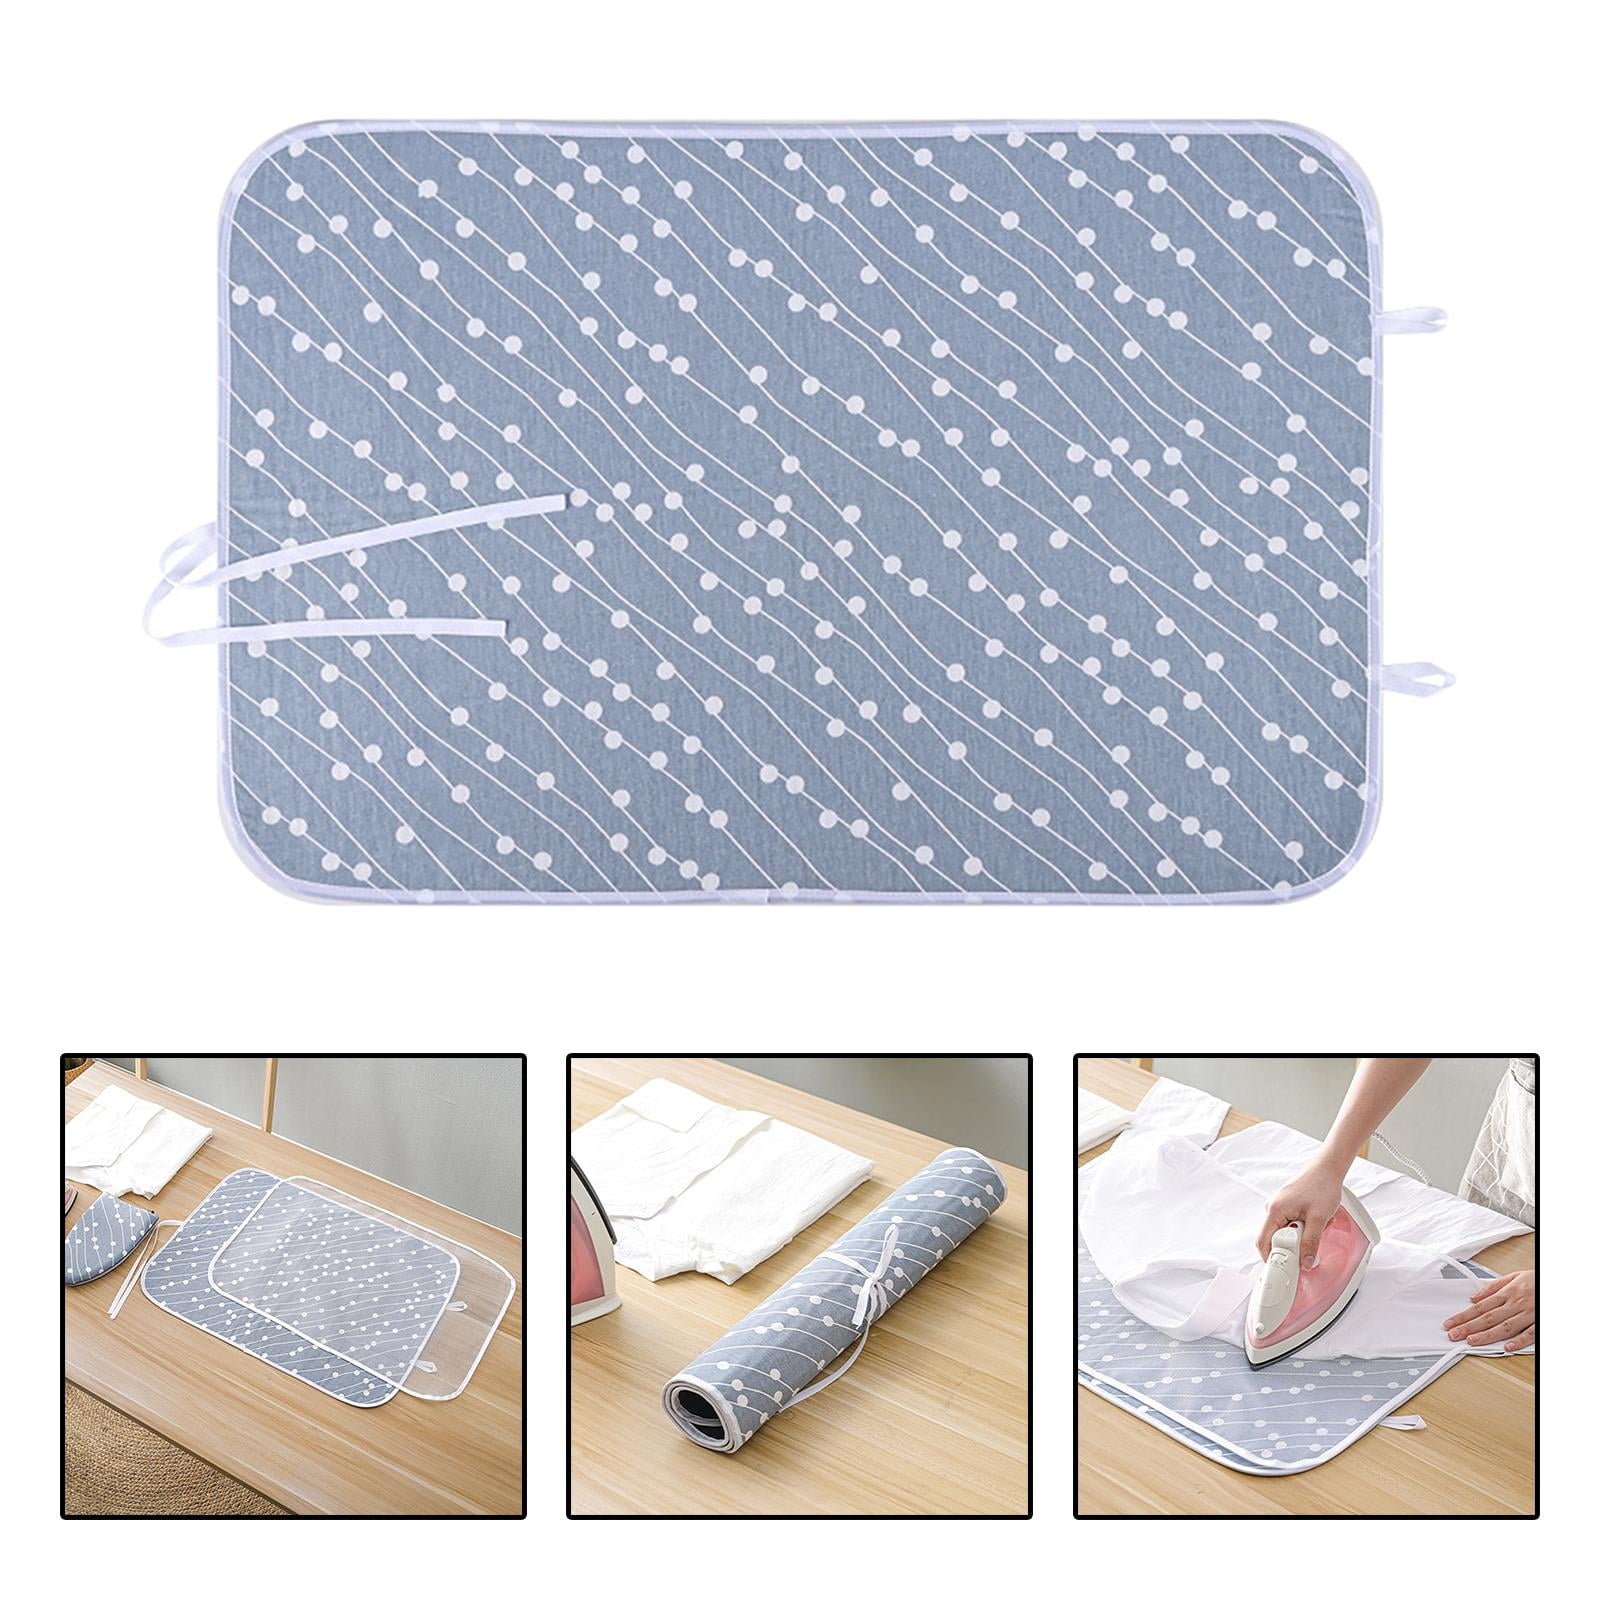 WellieSTR 10PCS Ironing Mat, Portable Travel Ironing Pad,Isolate Heat Pad  Cover Mesh for Washer,Dryer,Table Top,Countertop,Ironing Board for Small